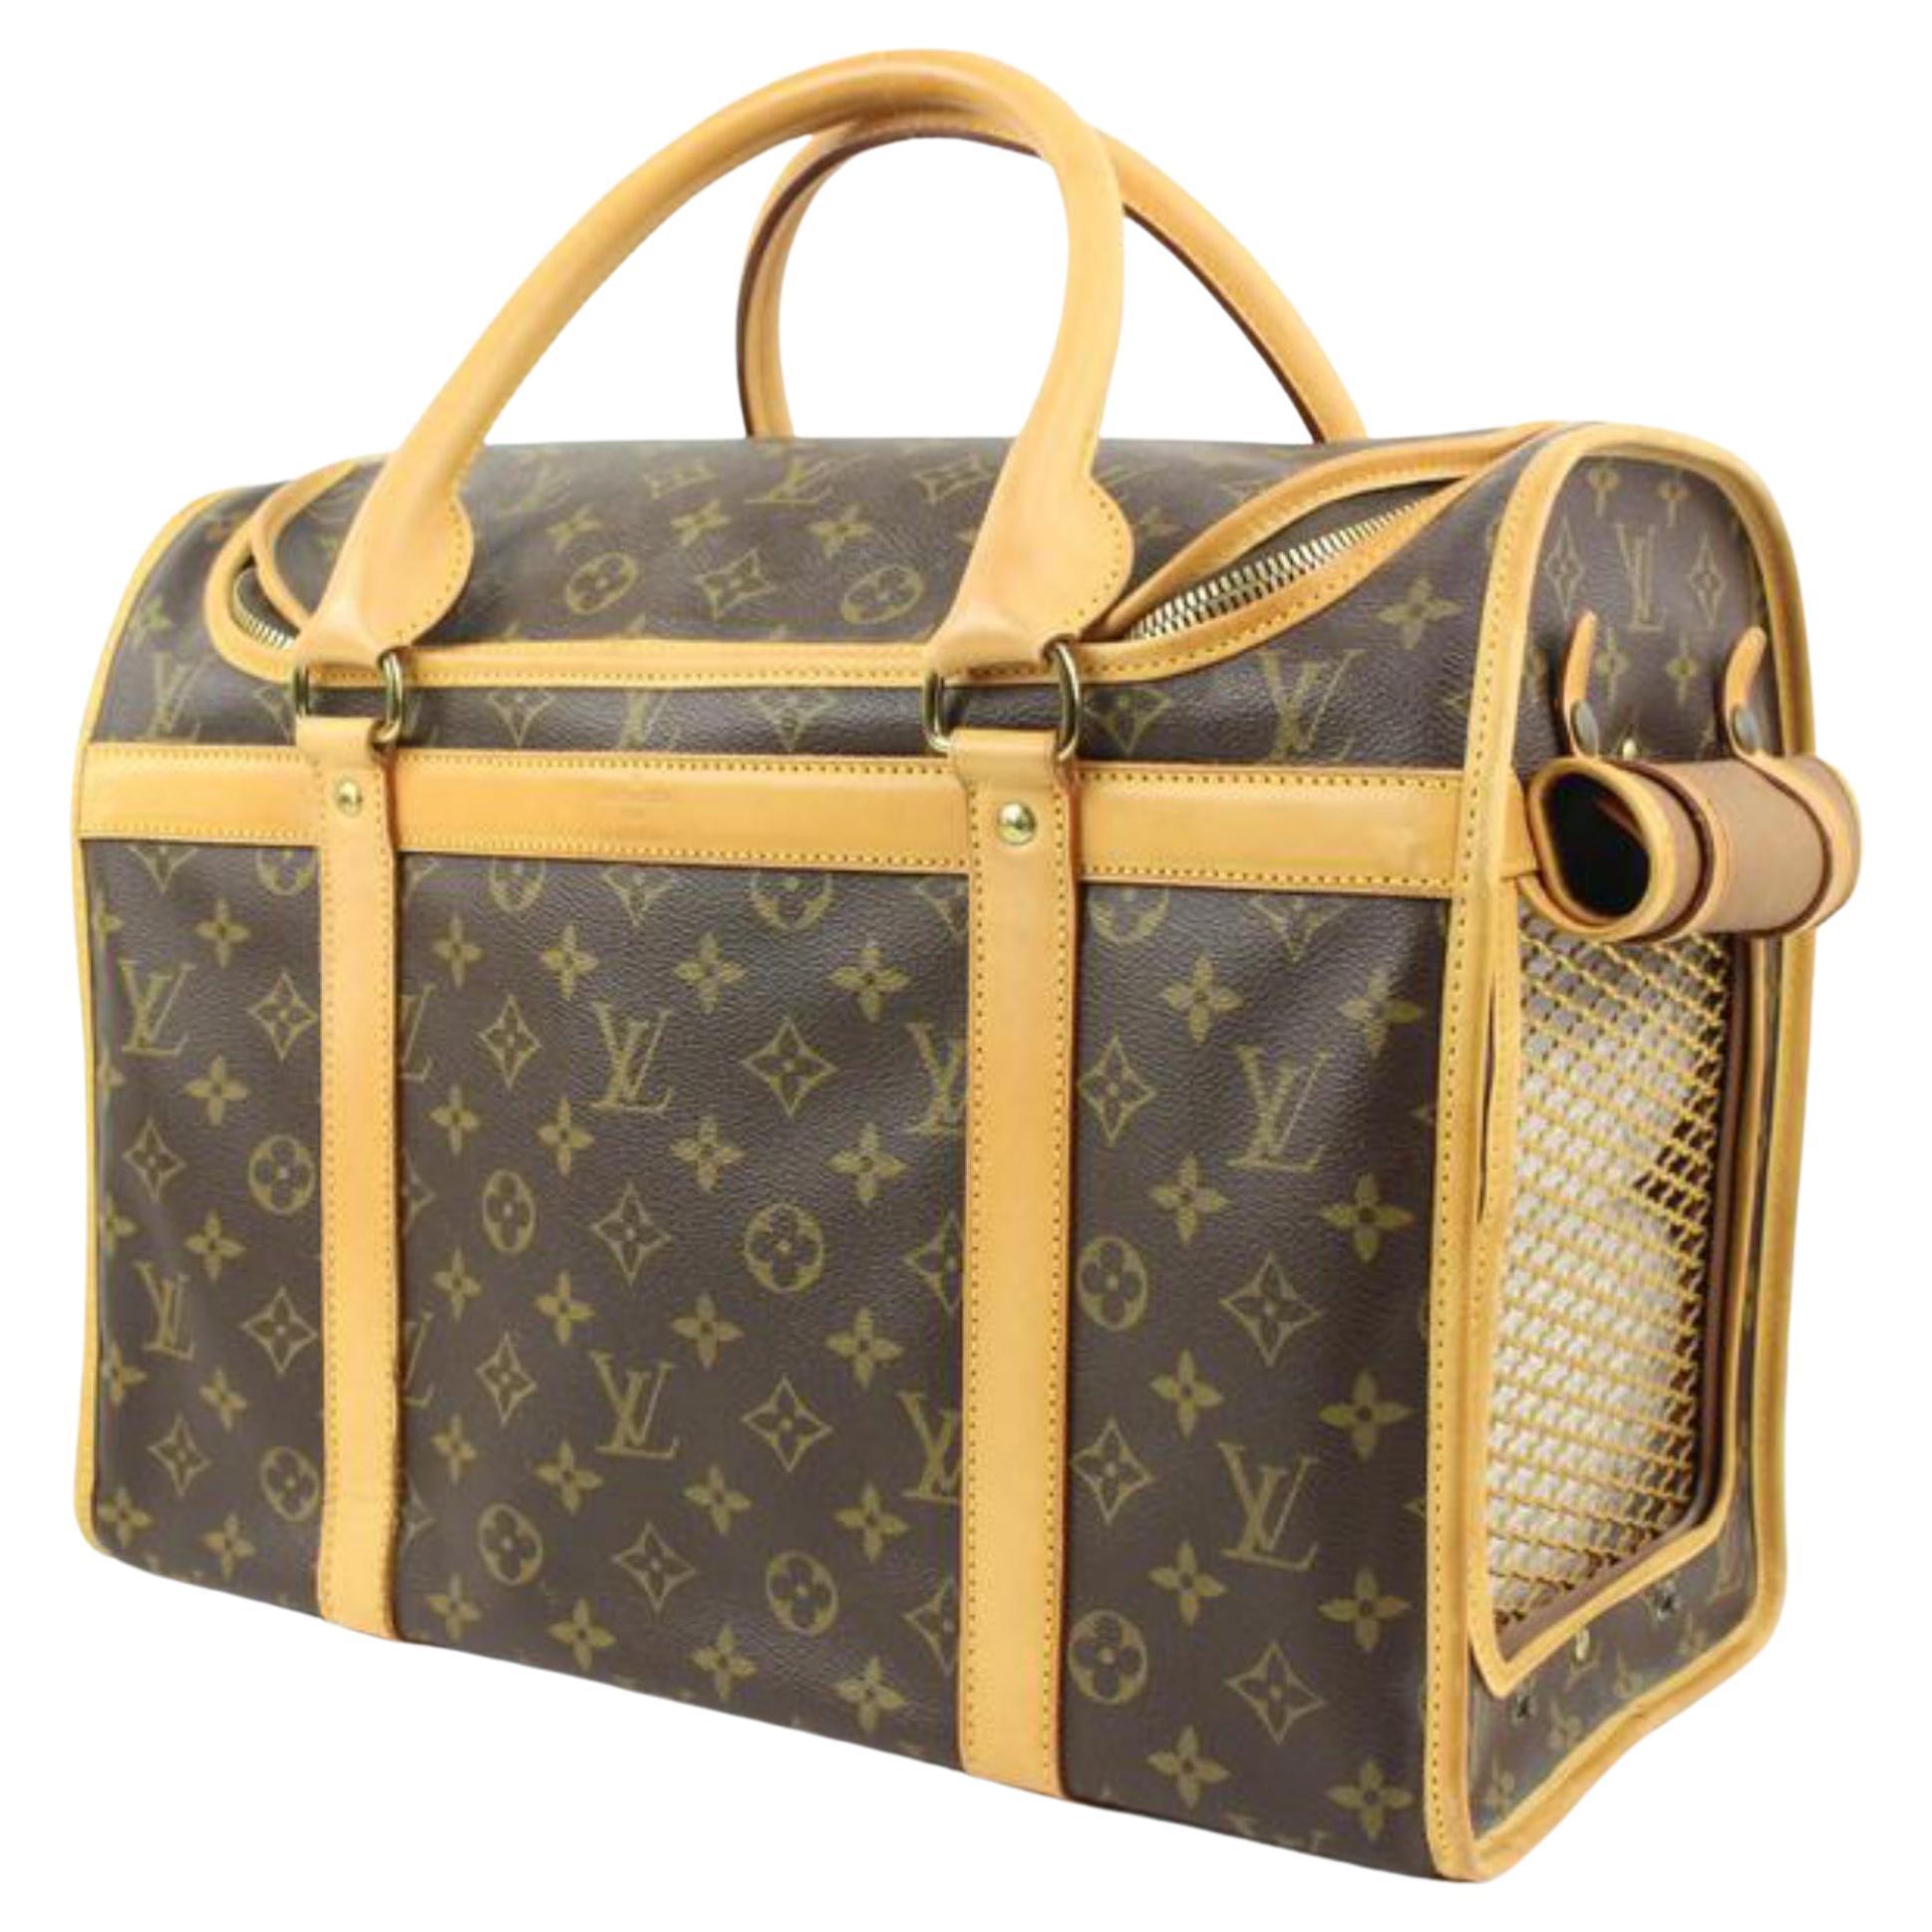 Louis Vuitton French Company Sac Chien Monogram Dog Carrier Travel Bag 40cm  70s at 1stDibs